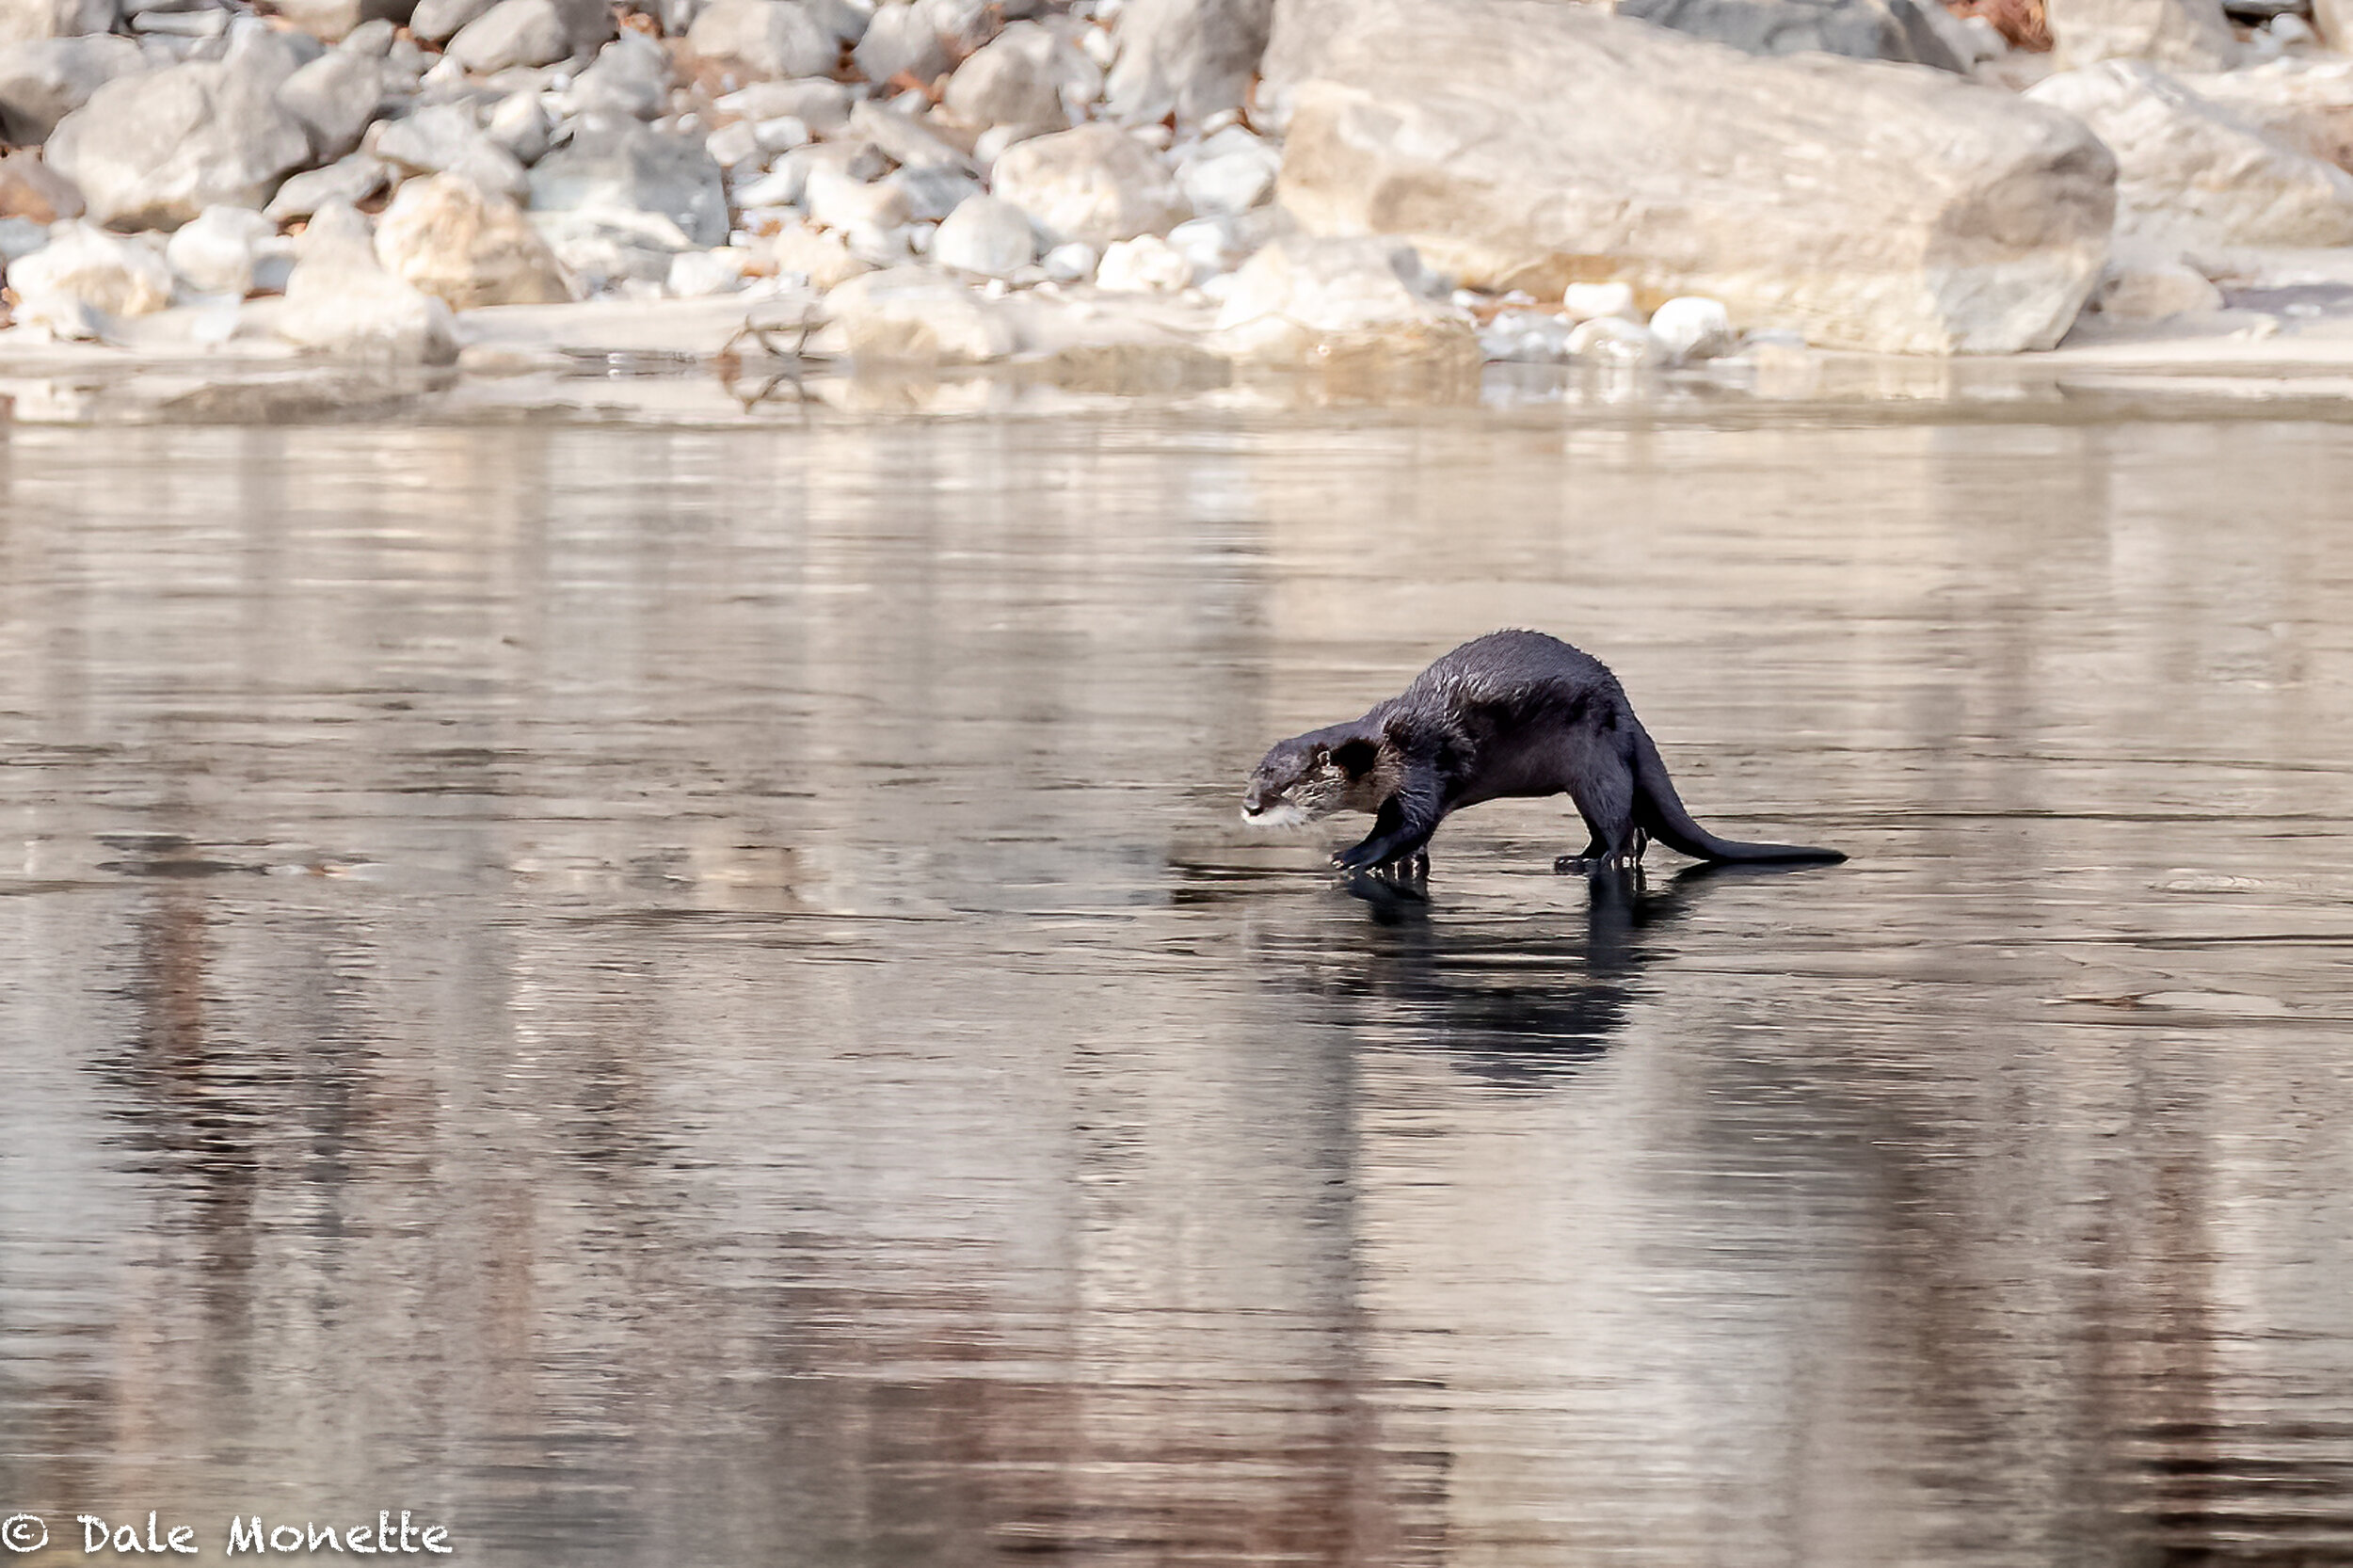   I found this northern river otter  wandering around on a partially frozen cove in the Quabbin. They are hard to find out of water. This one went into the woods right beside me as I stood quiet on the shoreline.   